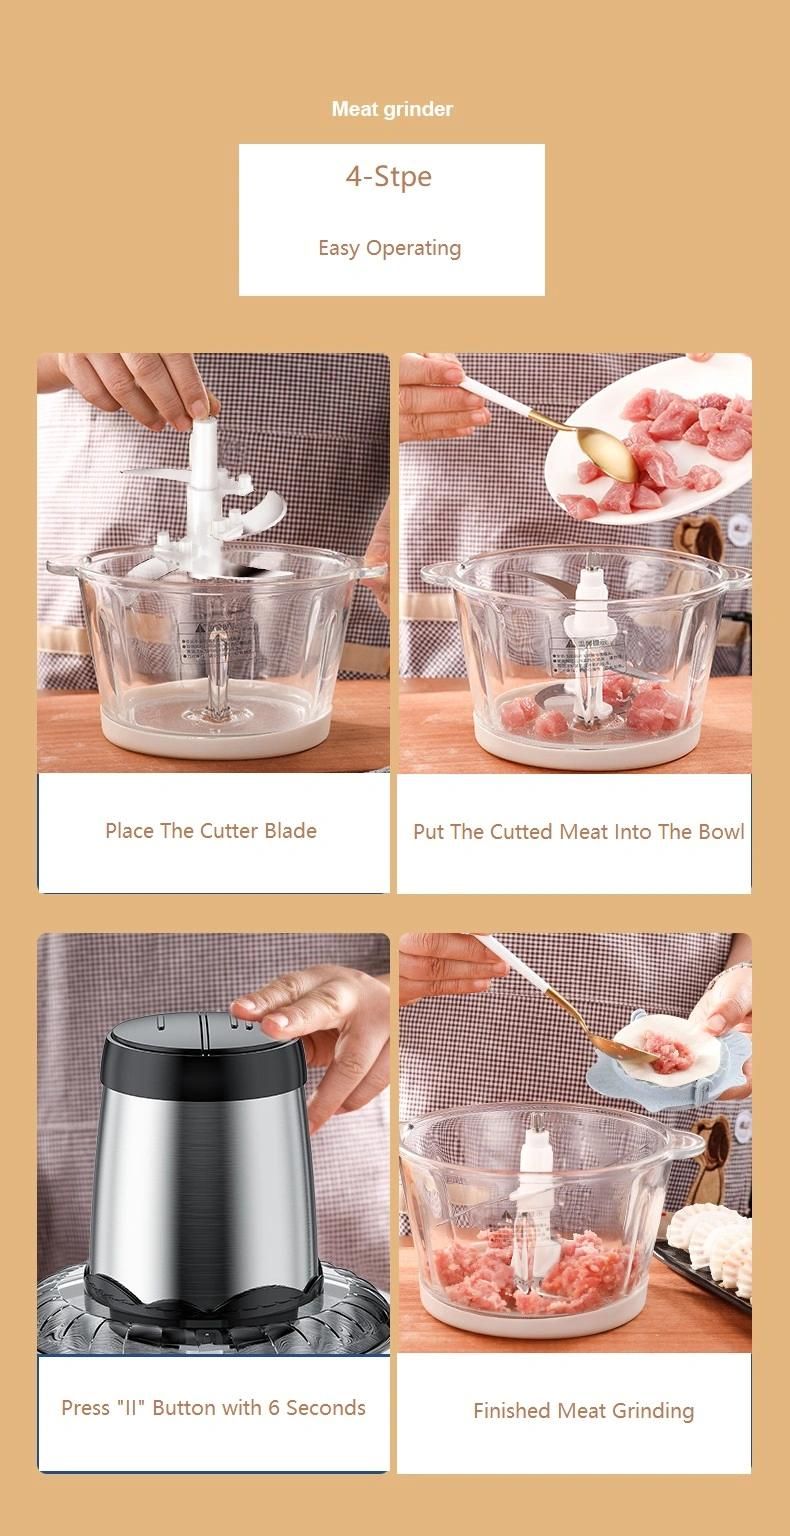 3L SS304 Bowl Meat Grinder Double-Layer Four-Leaf Blade Three-Dimensional Cutting Food Processor